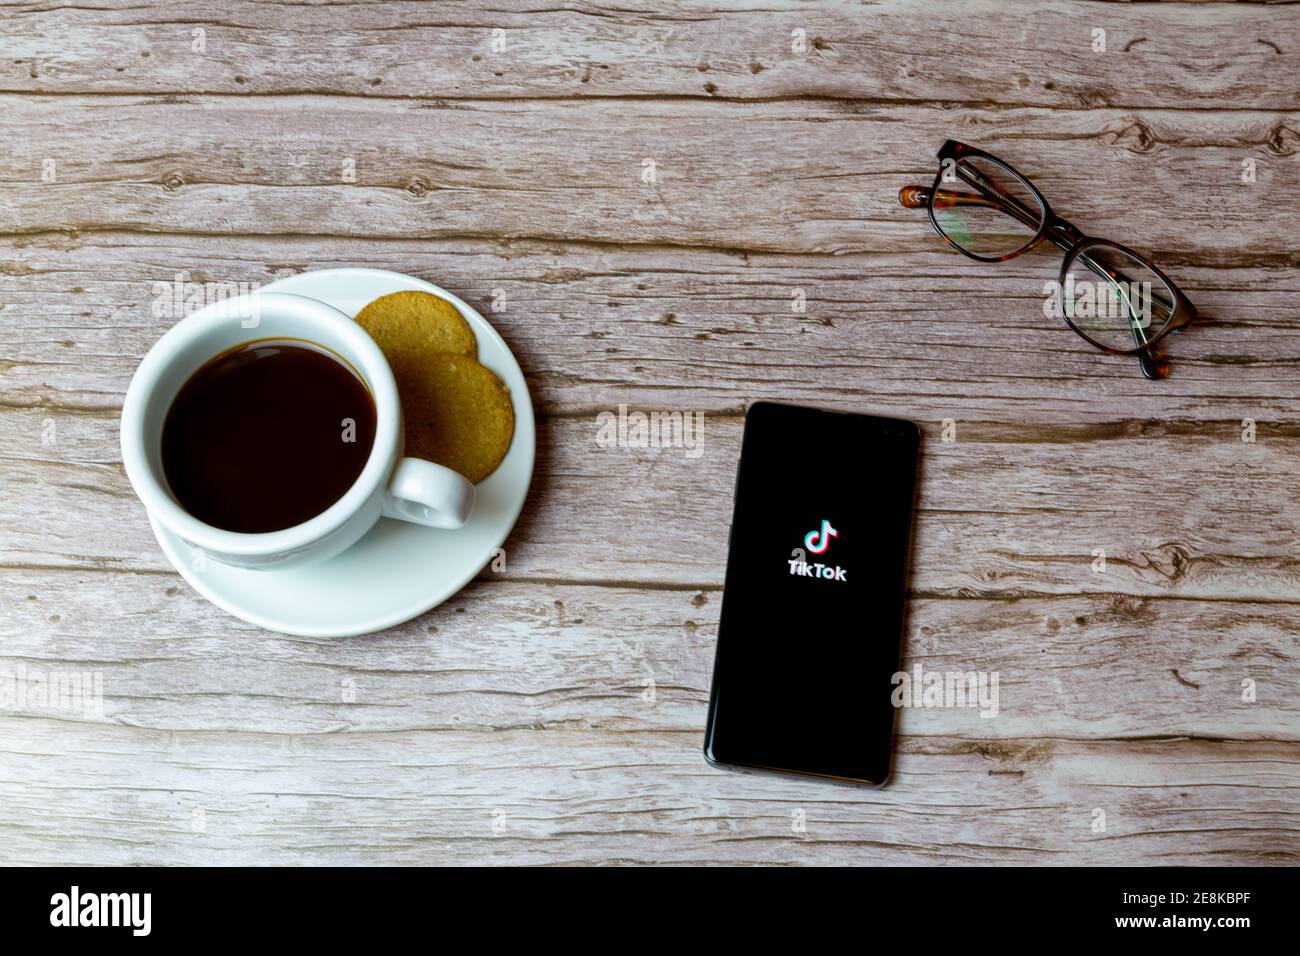 A mobile phone or cell phone laid on a table with the TikTok app open Stock Photo